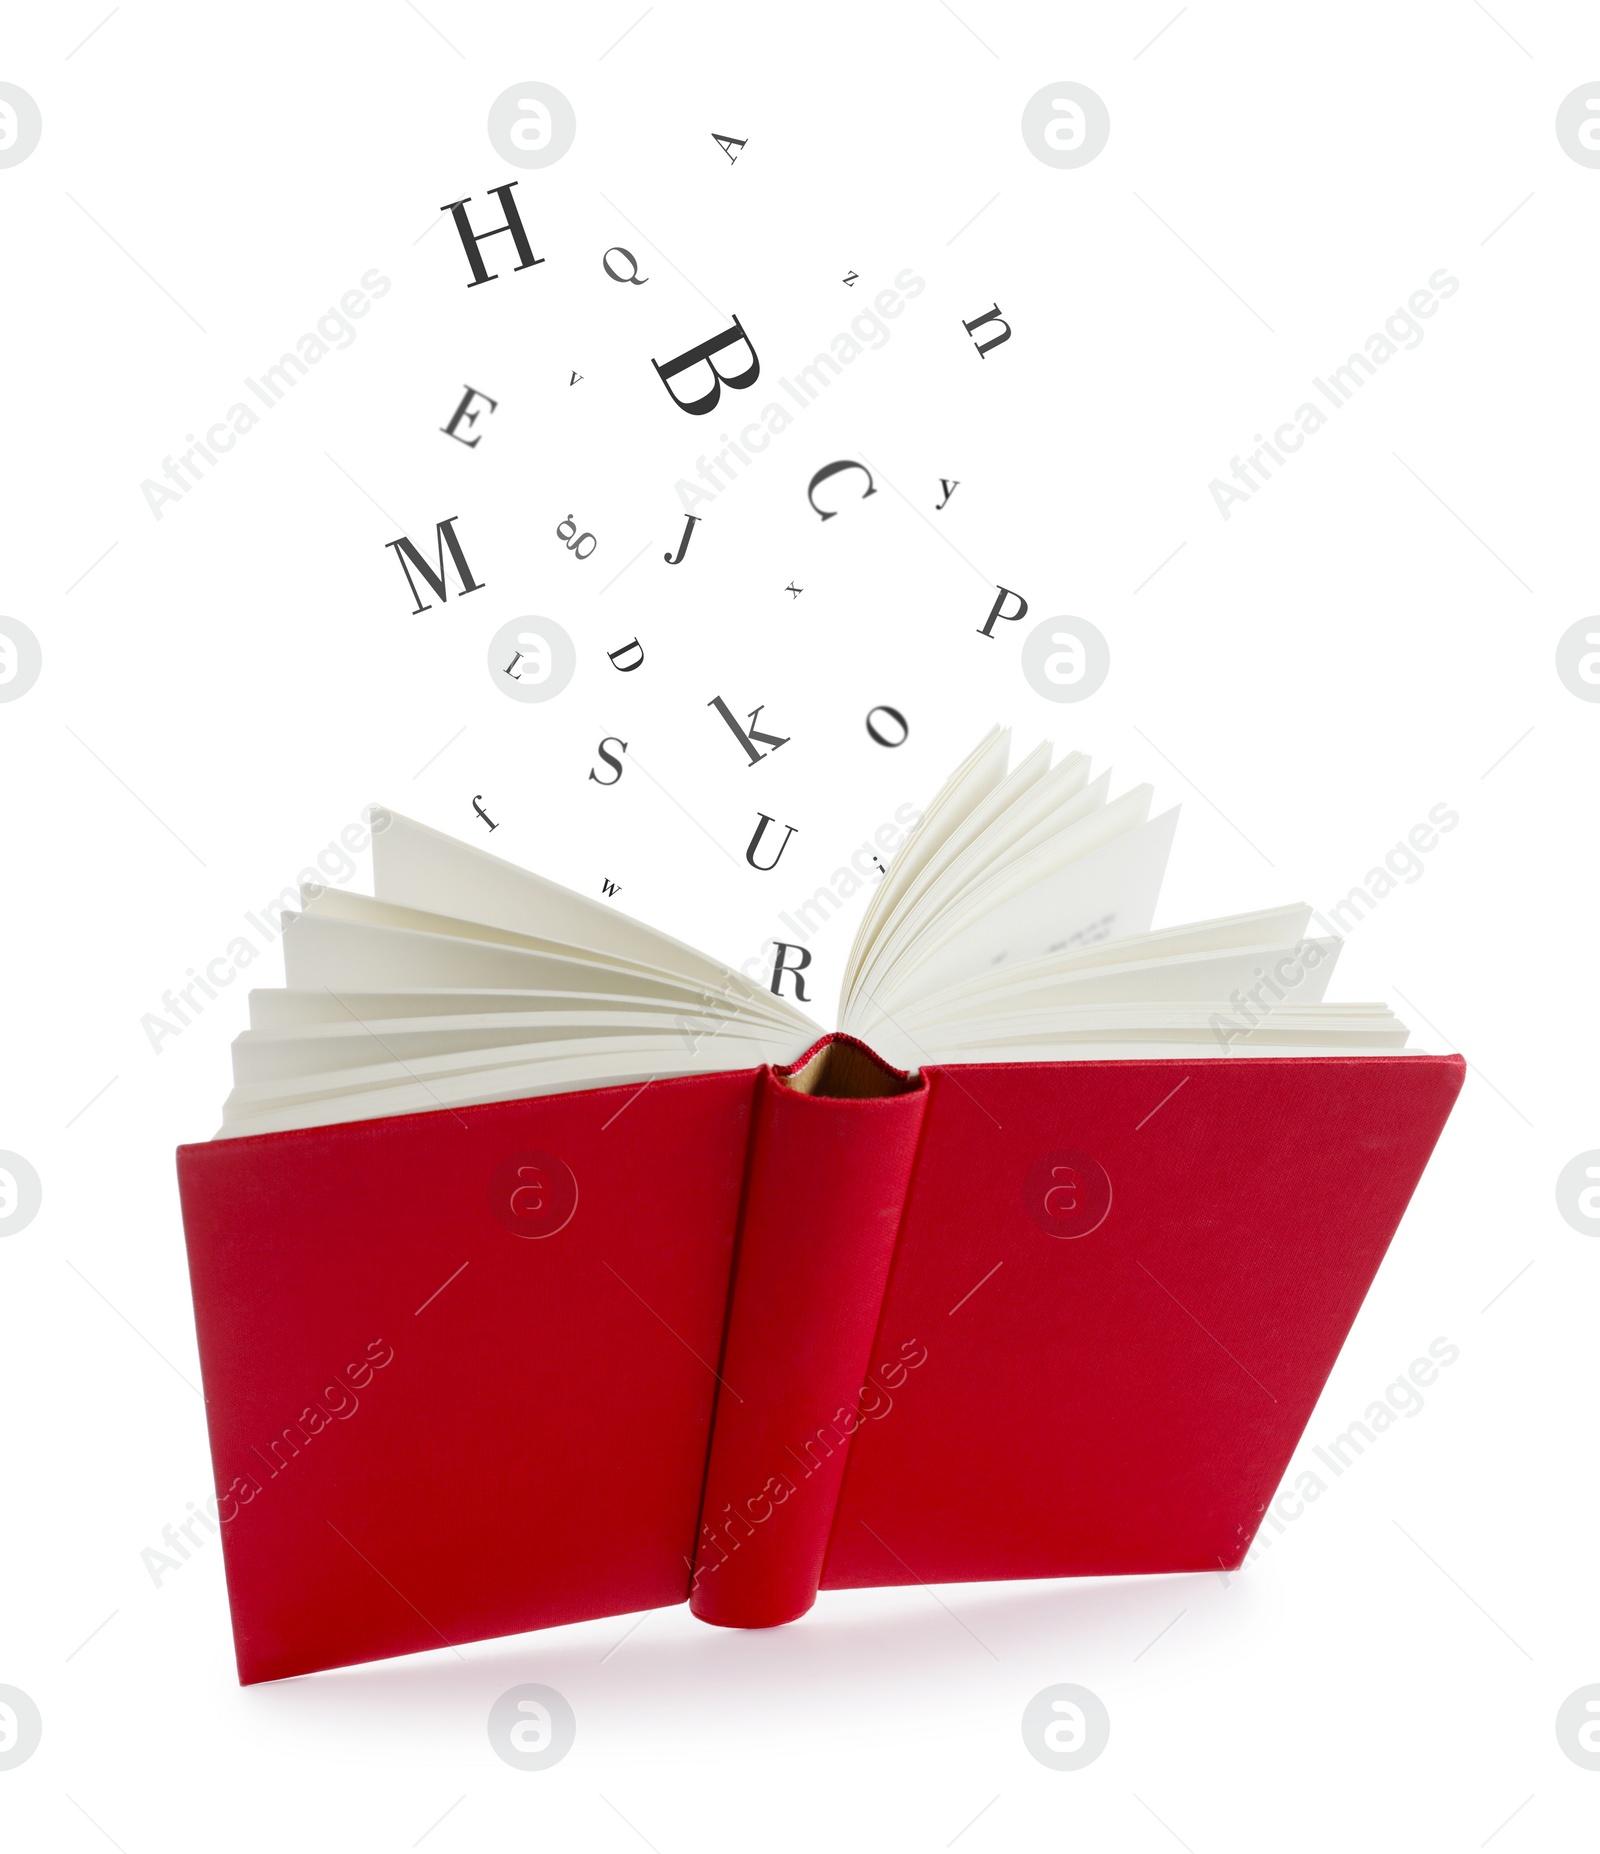 Image of Open book in air with letters flying out of it on white background